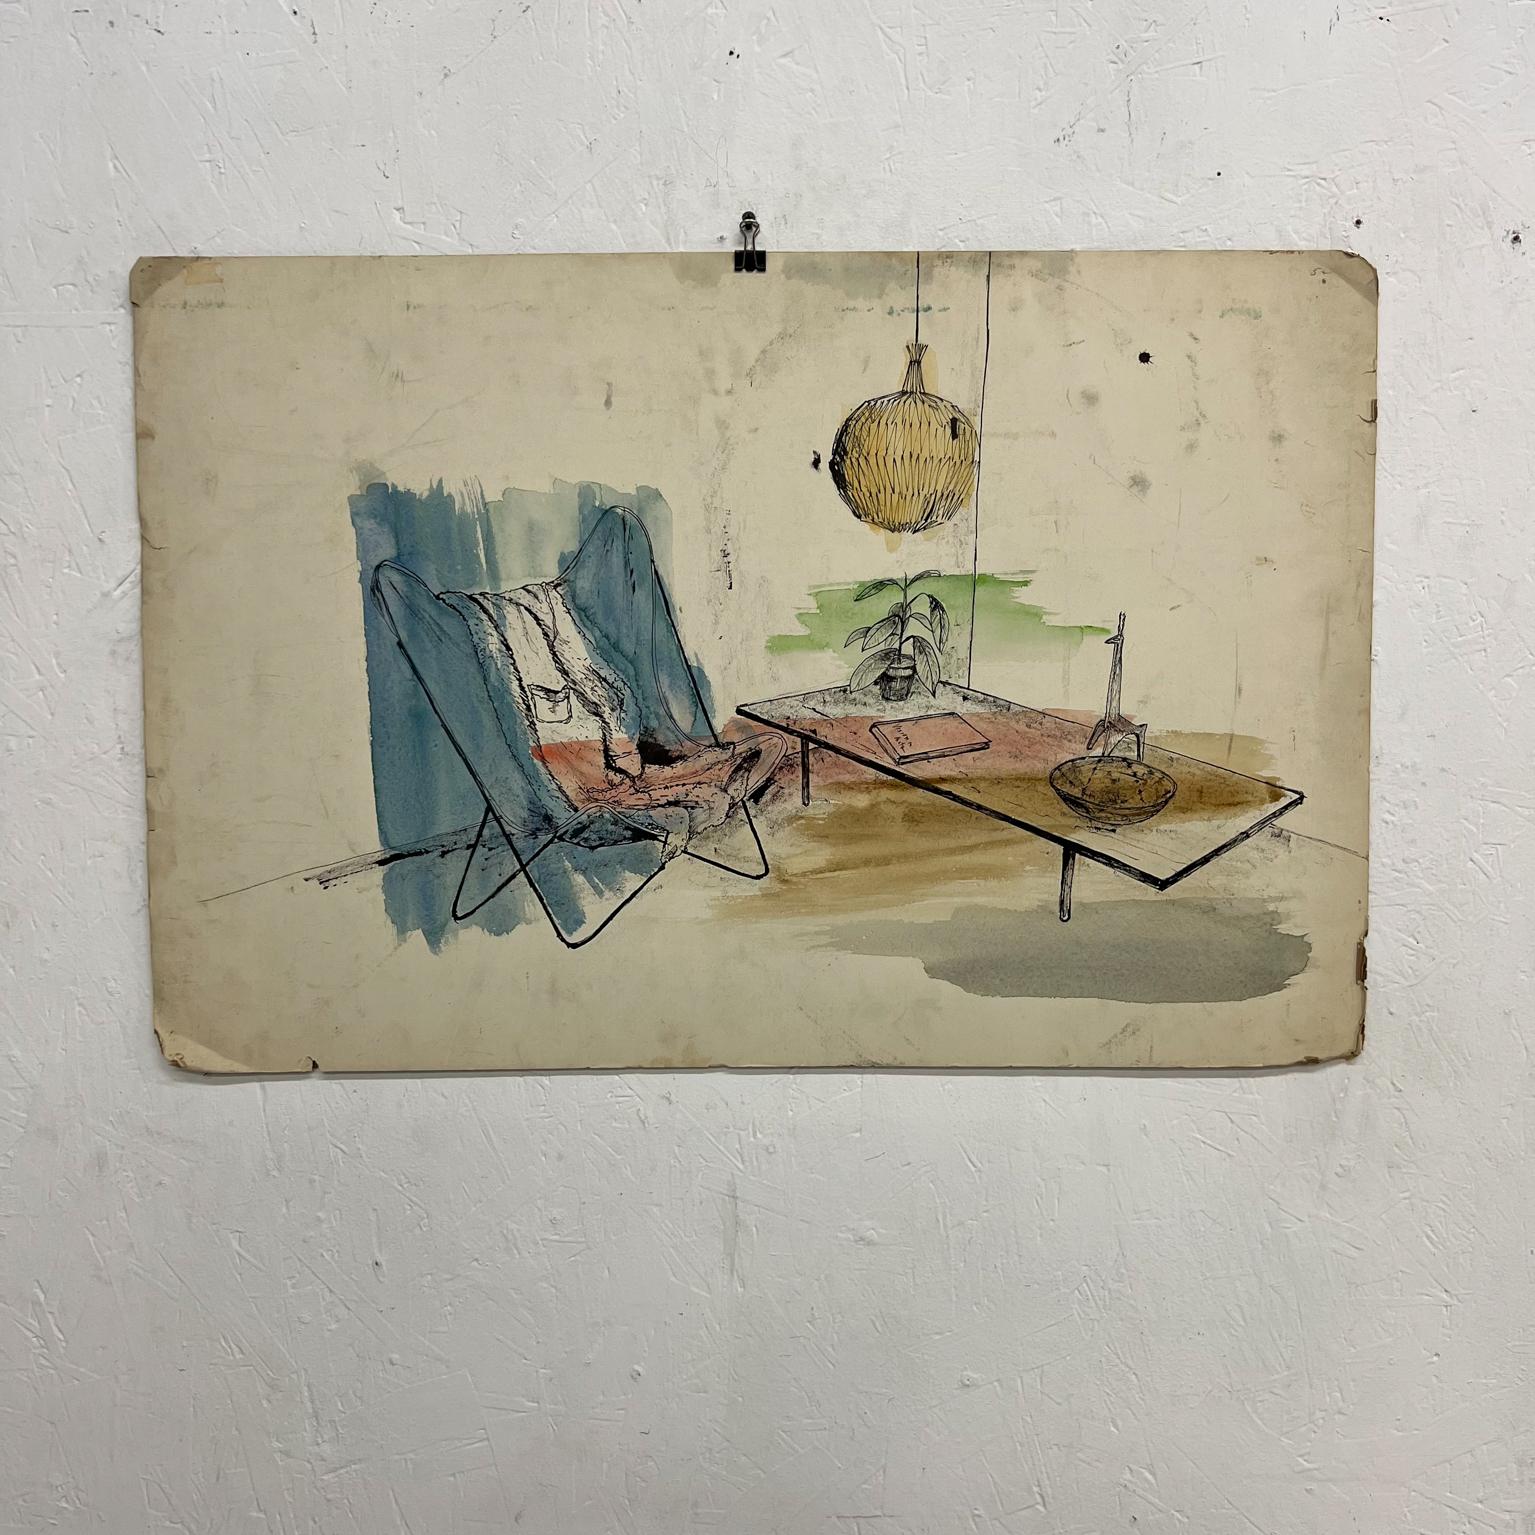 1960s Cool blue watercolor ink on paper modern interior butterfly chair + globe pendant + coffee table.
No signature.
30 x 20
Preowned original condition unrestored vintage art.
Some distress and tears with discoloration on paper.
Refer to all